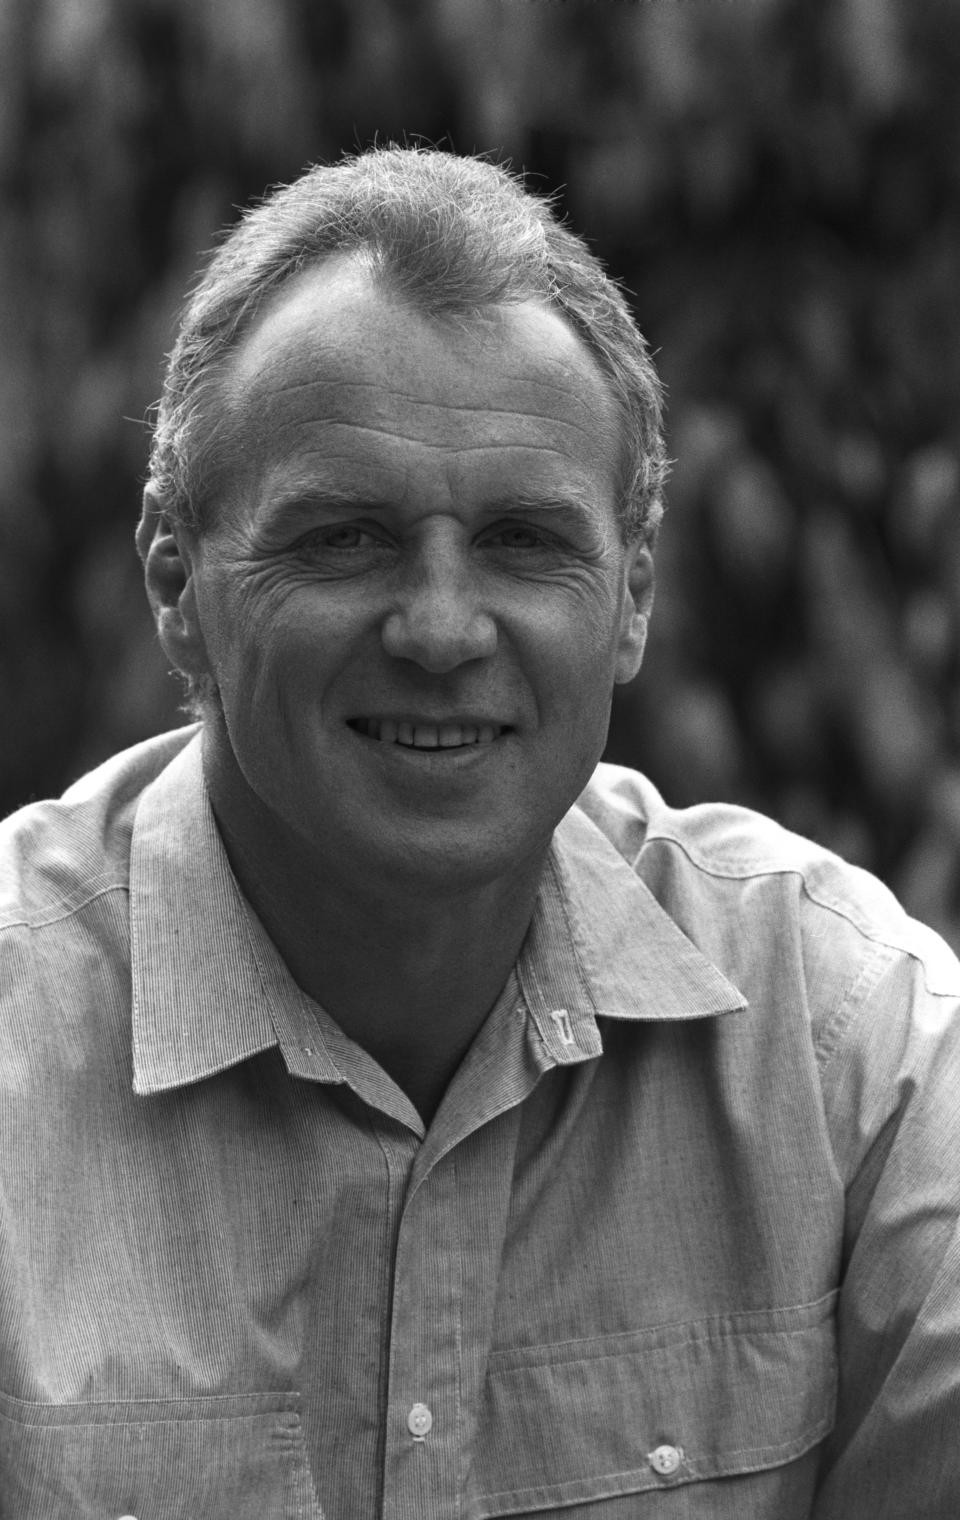 Actor Alan Dale, as Jim Robinson in the Australian soap opera Neighbours, Australia, 20th October 1988. (Photo by Express Newspapers/Getty Images)